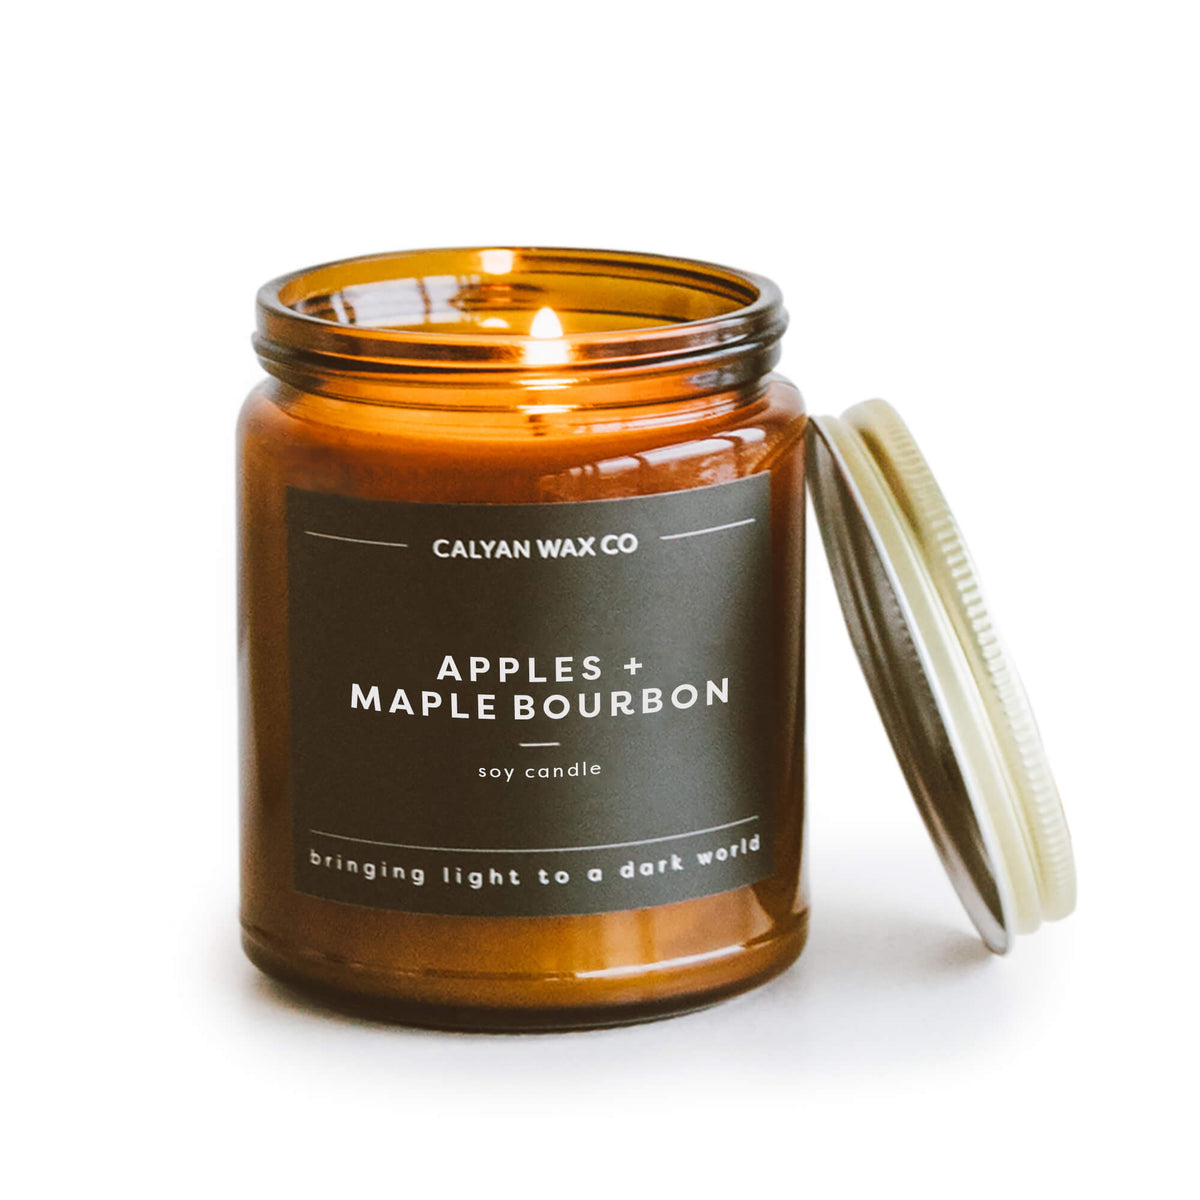 Apples + Maple Bourbon Soy Candle in an Amber Jar - Calyan Wax Co.